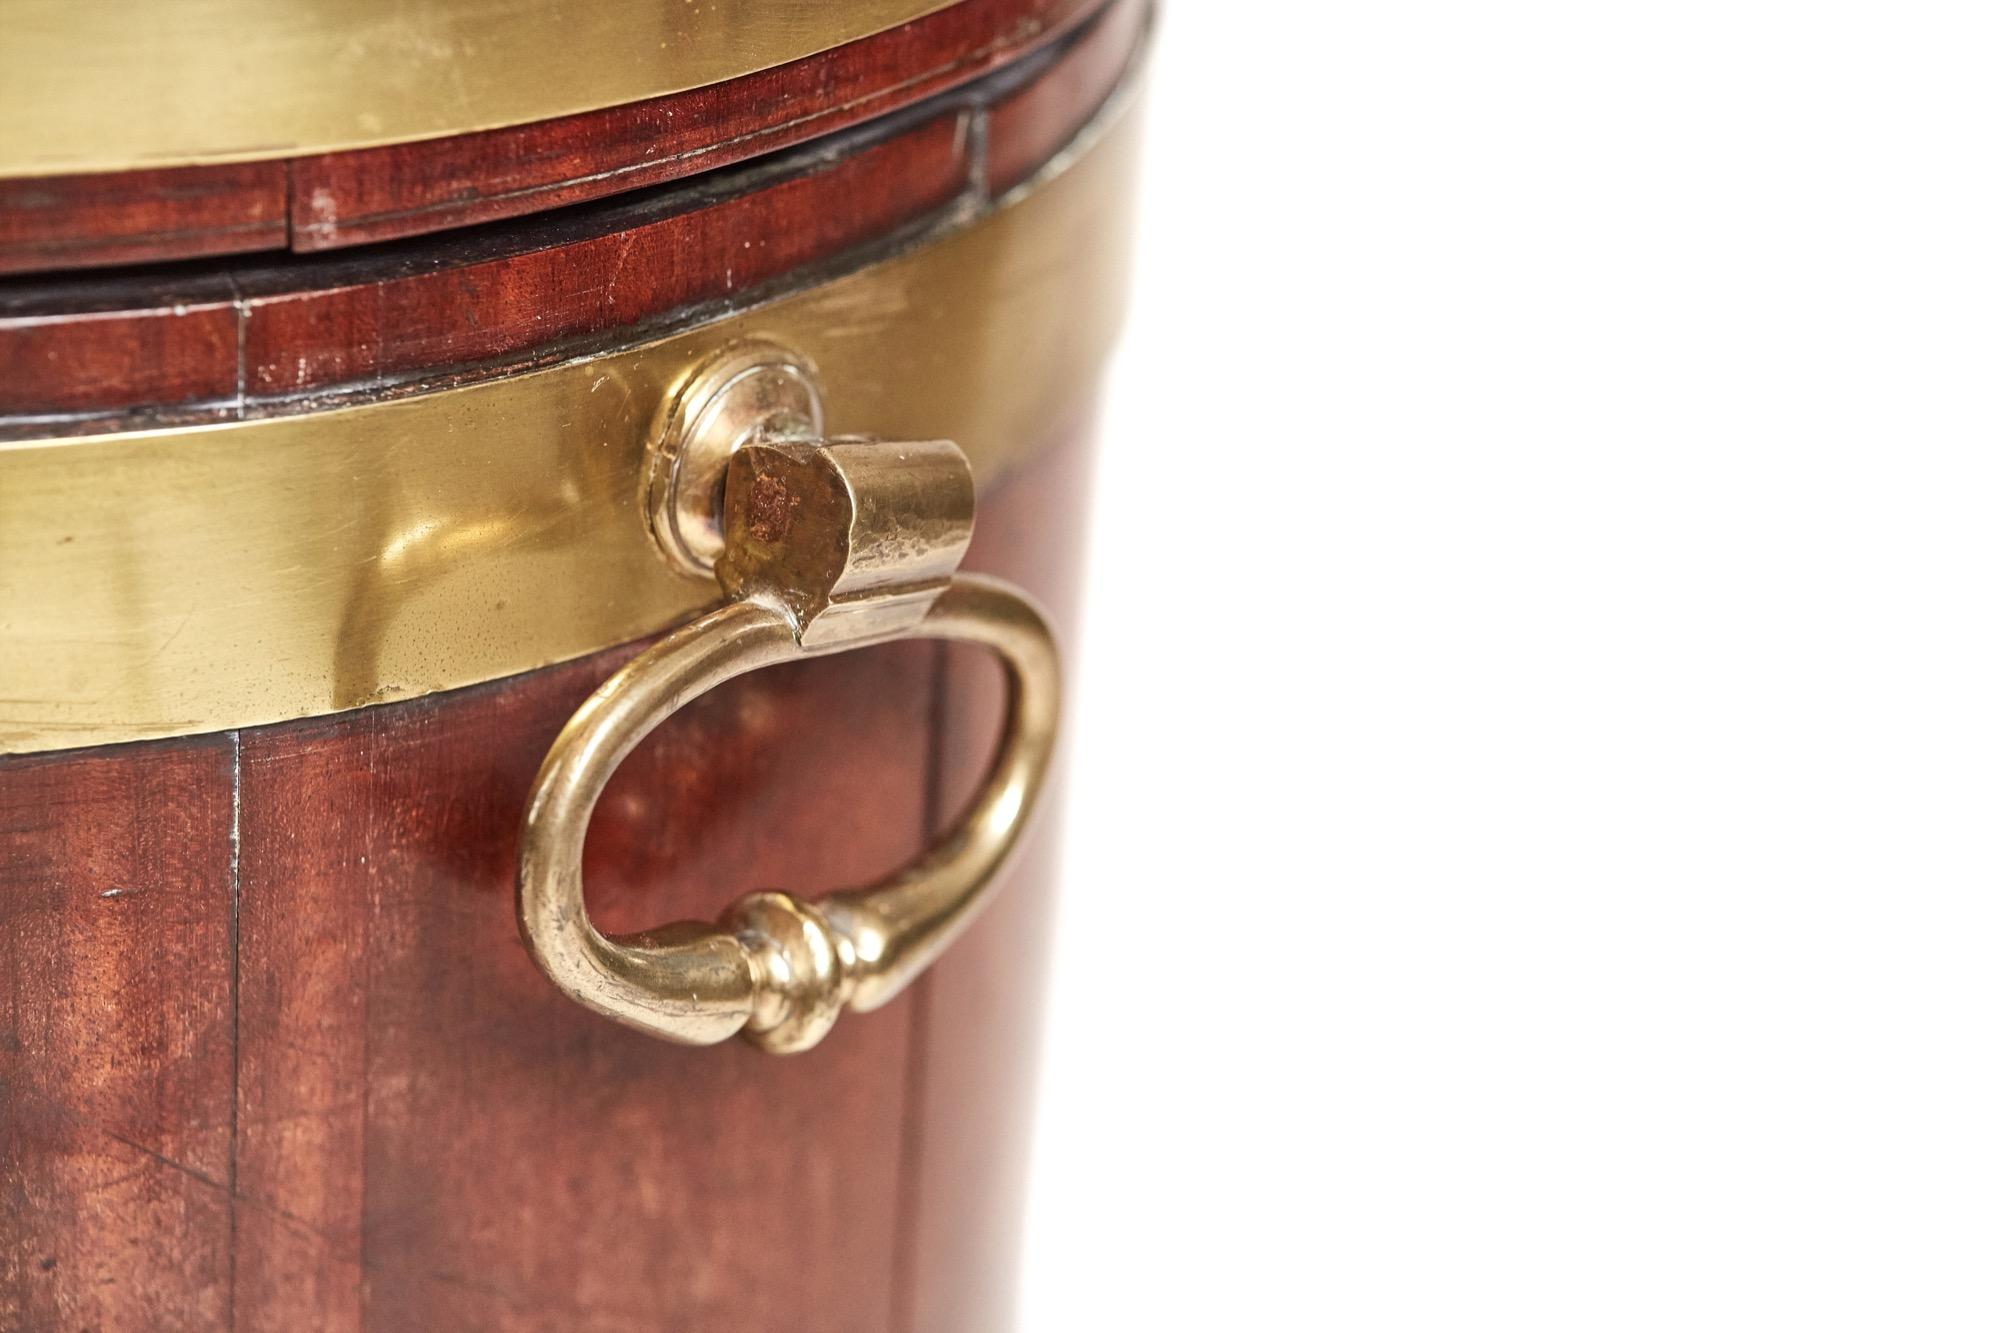 Magnificent antique George III oval mahogany brass bound wine cooler having the original lead lined interior, three original oval brass bands, original brass handles and supported by four out swept legs with original castors.

A rare example in